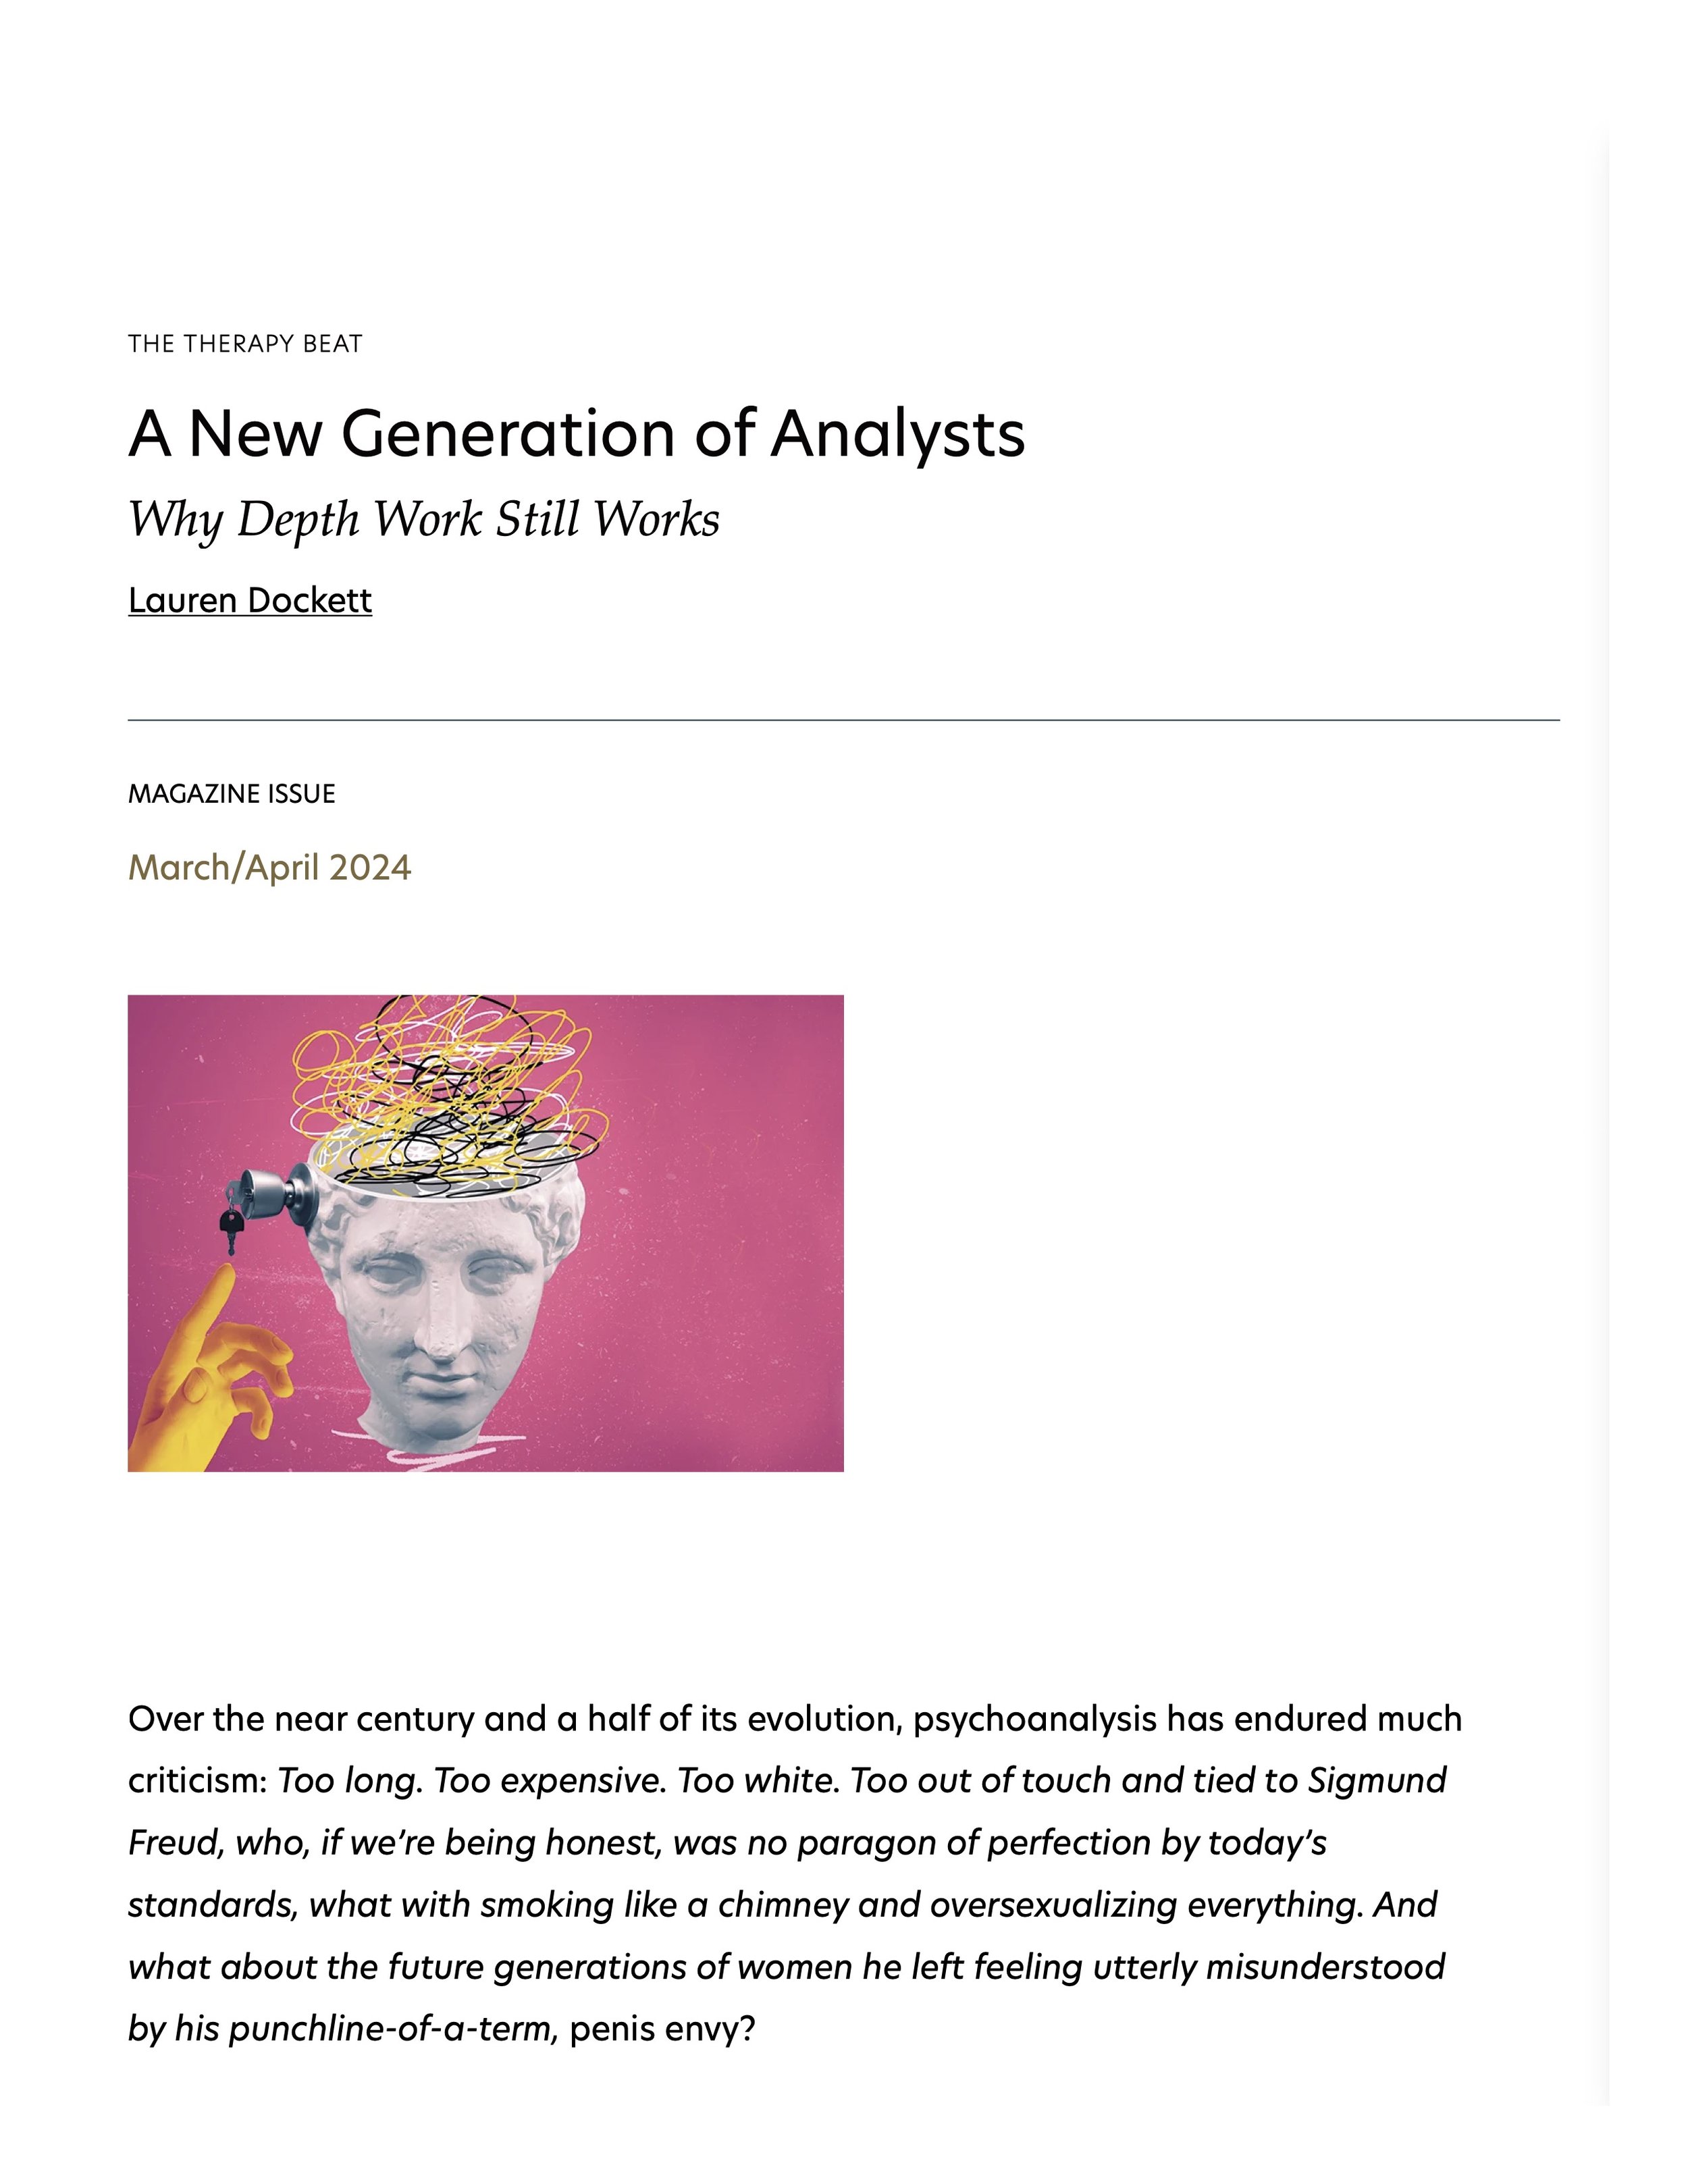 A New Generation of Analysts